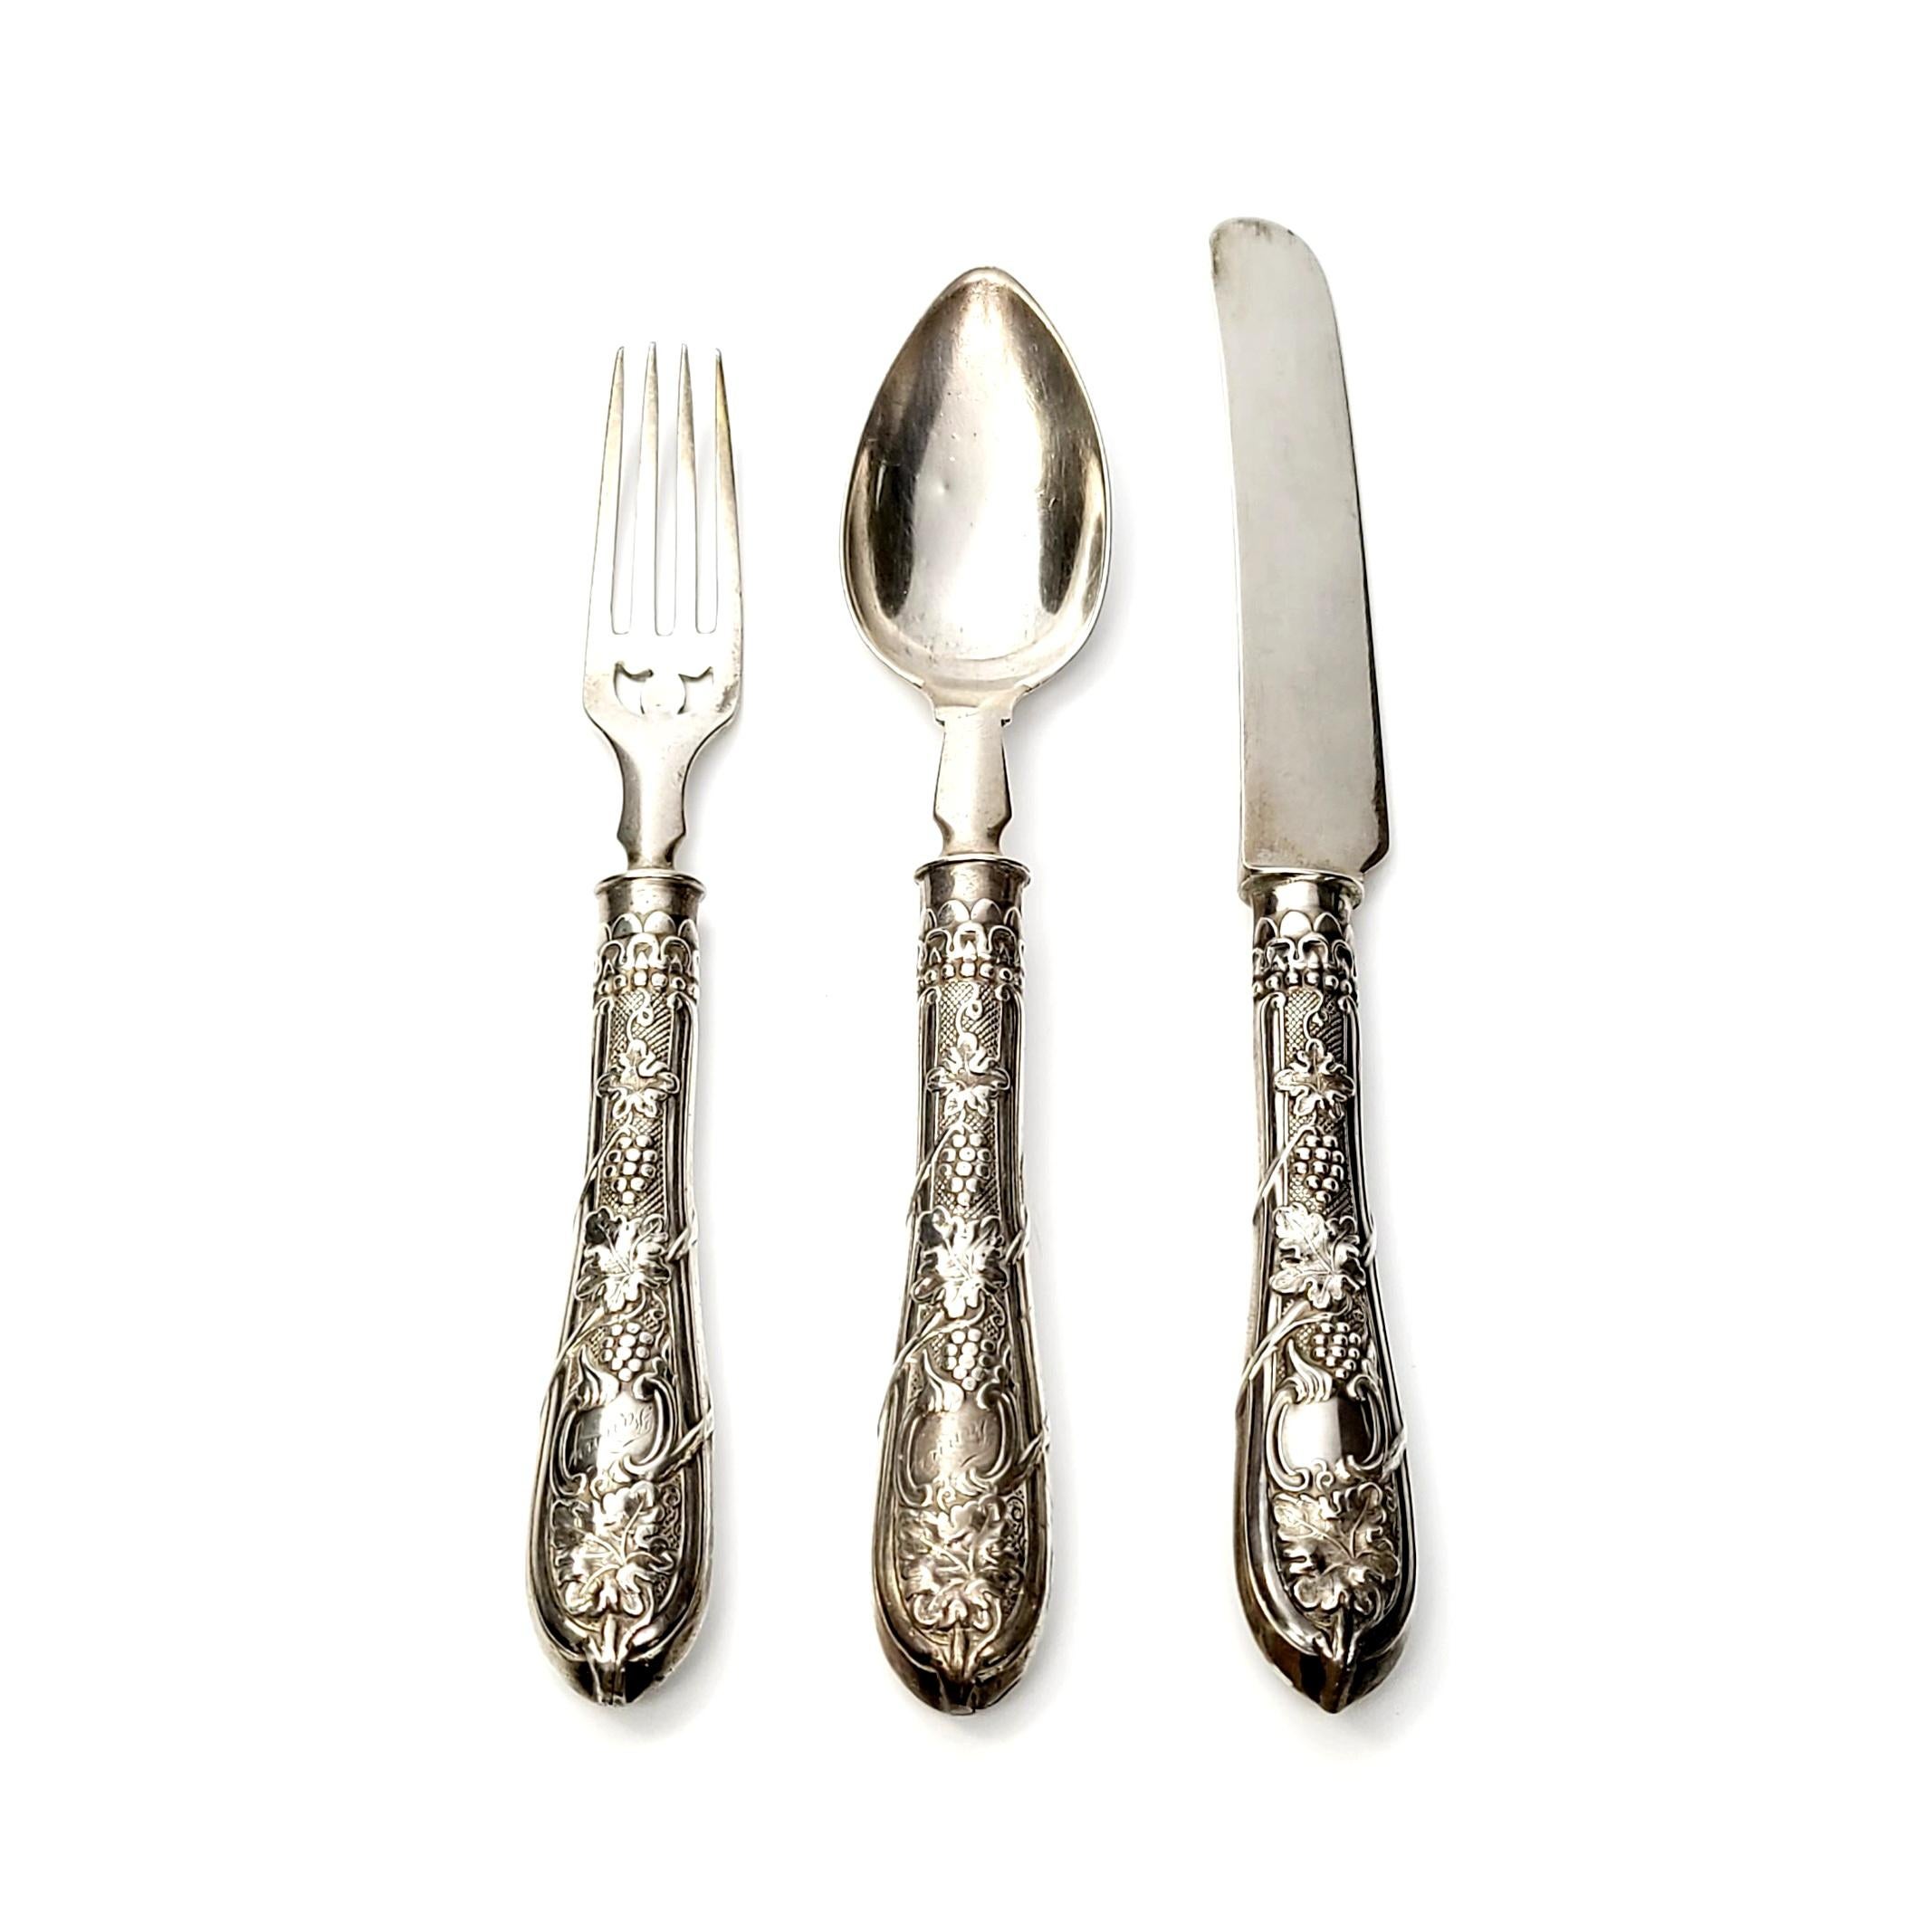 Antique coin silver knife, fork and spoon set by Albert Coles.

Engraved 